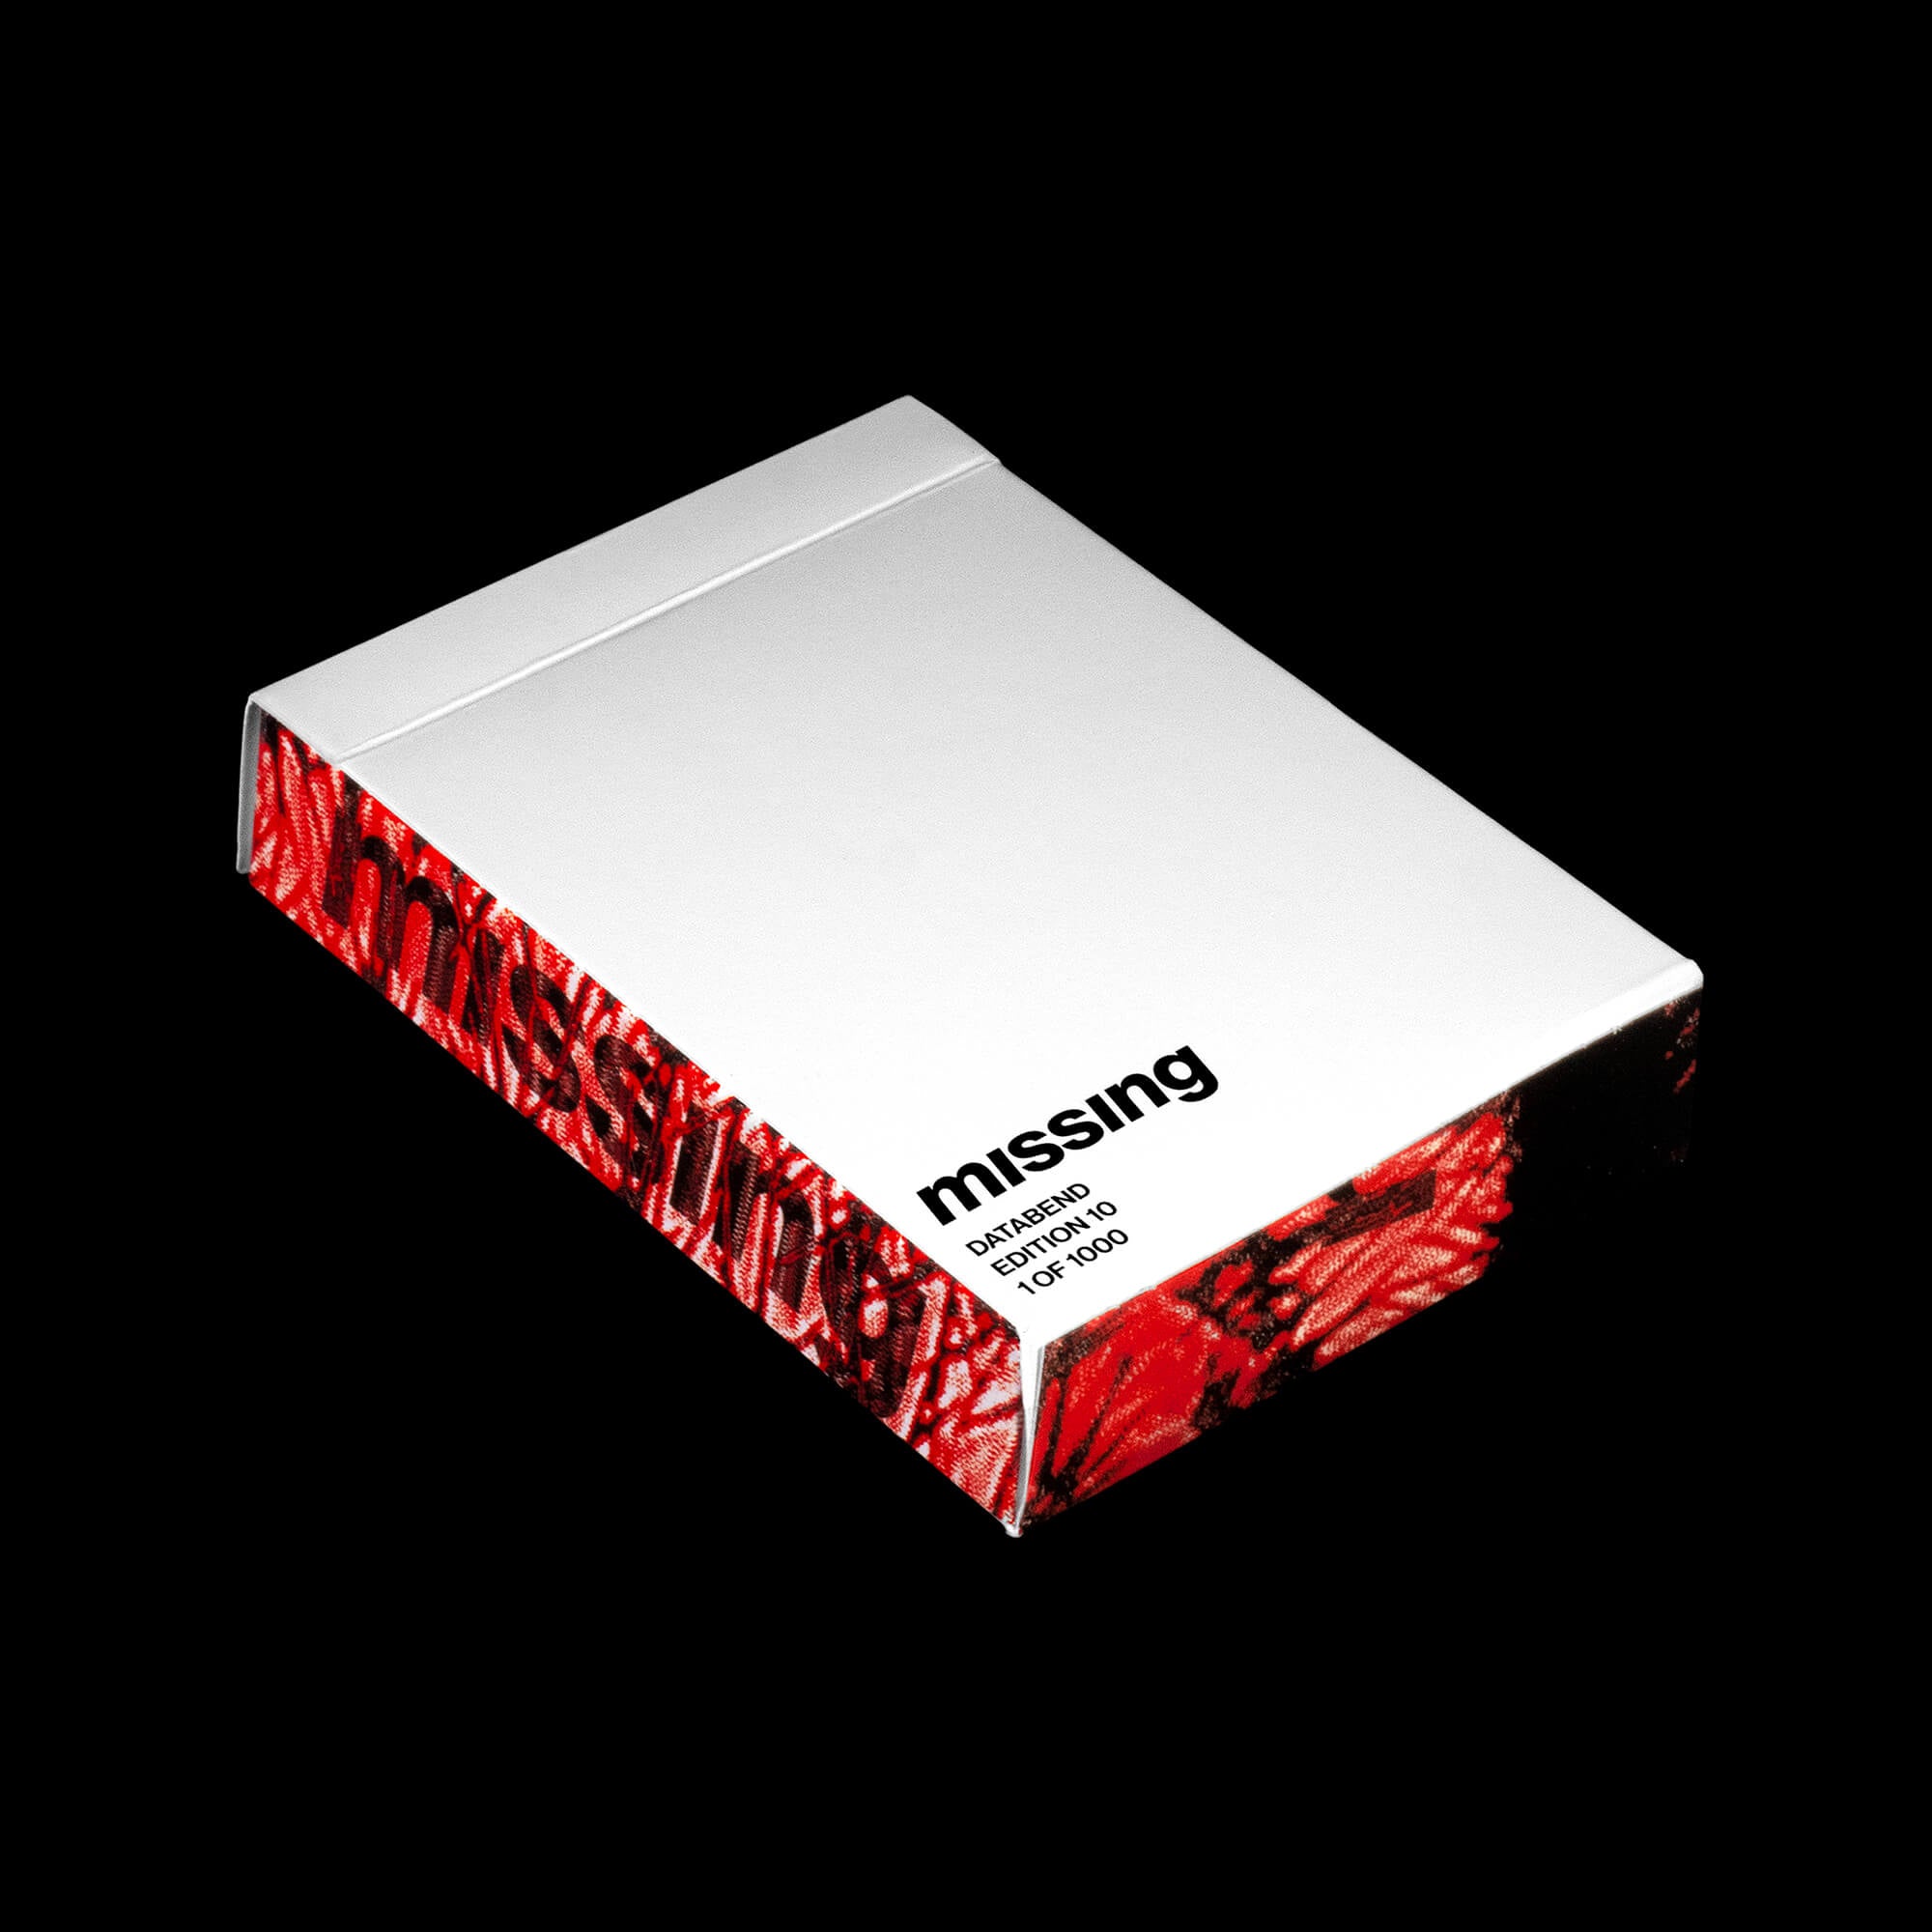 Missing cardistry databend playing cards decks uspcc 